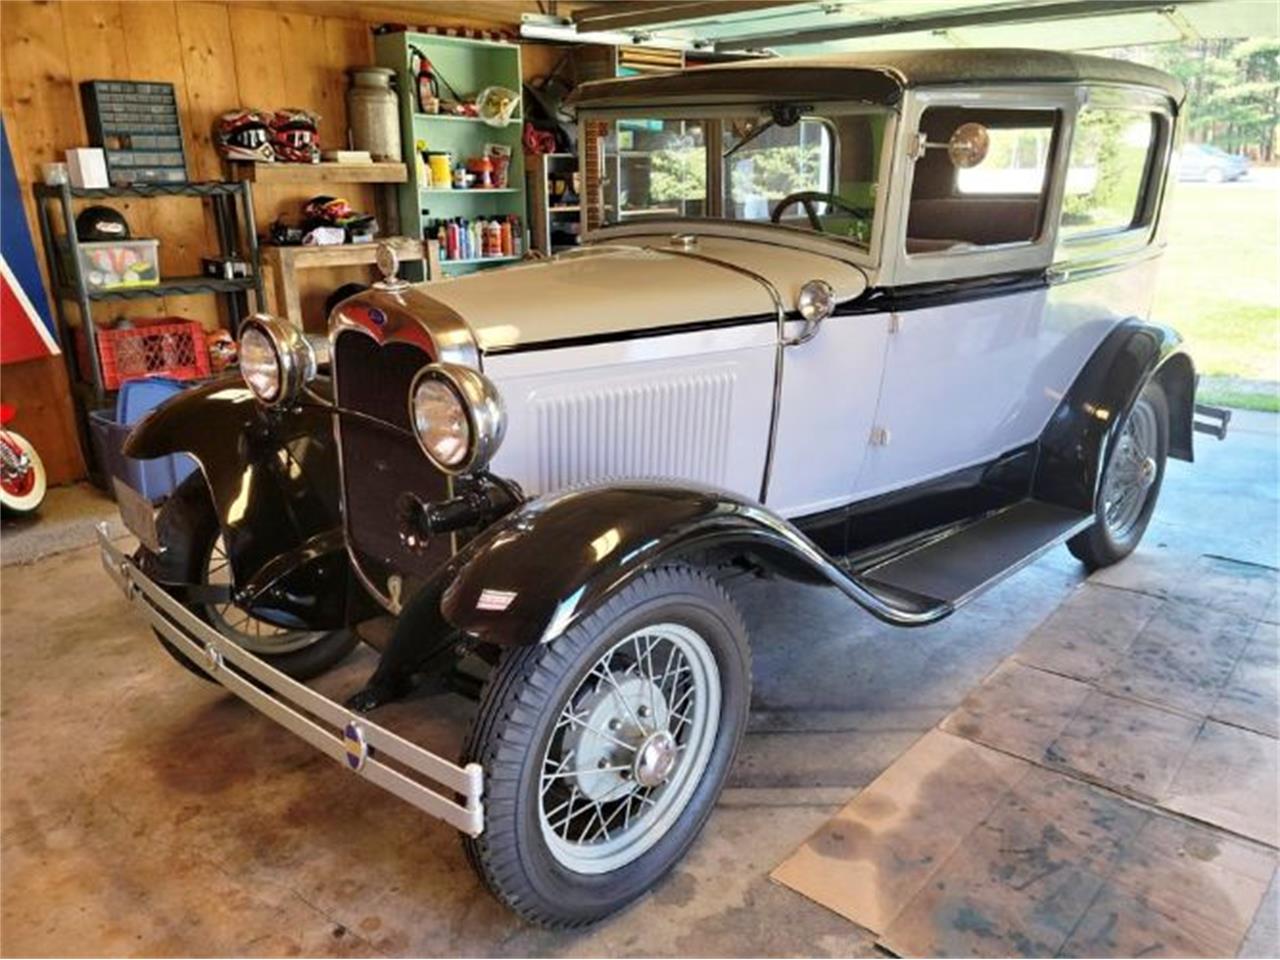 For Sale: 1930 Ford Model A in Cadillac, Michigan for sale in Cadillac, MI